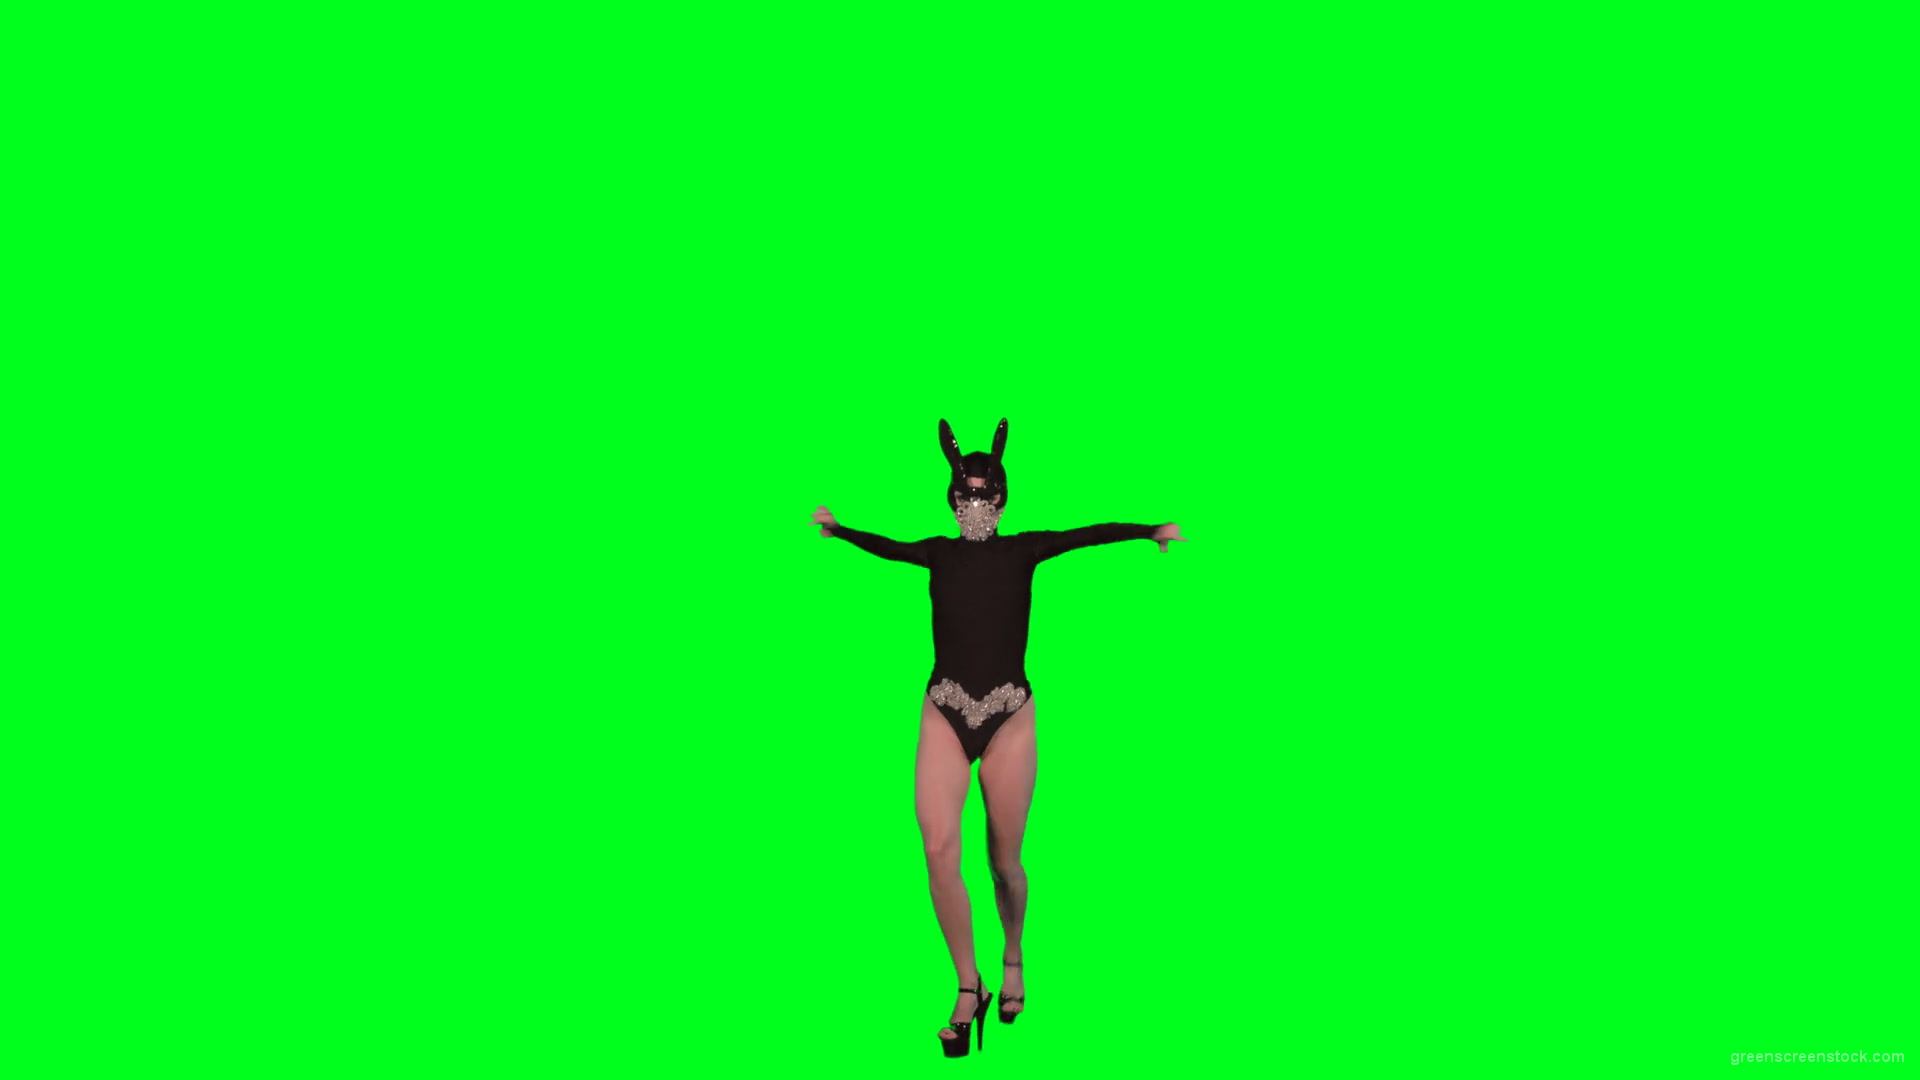 Rave-Calling-EDM-Go-Go-Dancing-Girl-performs-on-green-screen-4K-Video-Footage-1920_004 Green Screen Stock